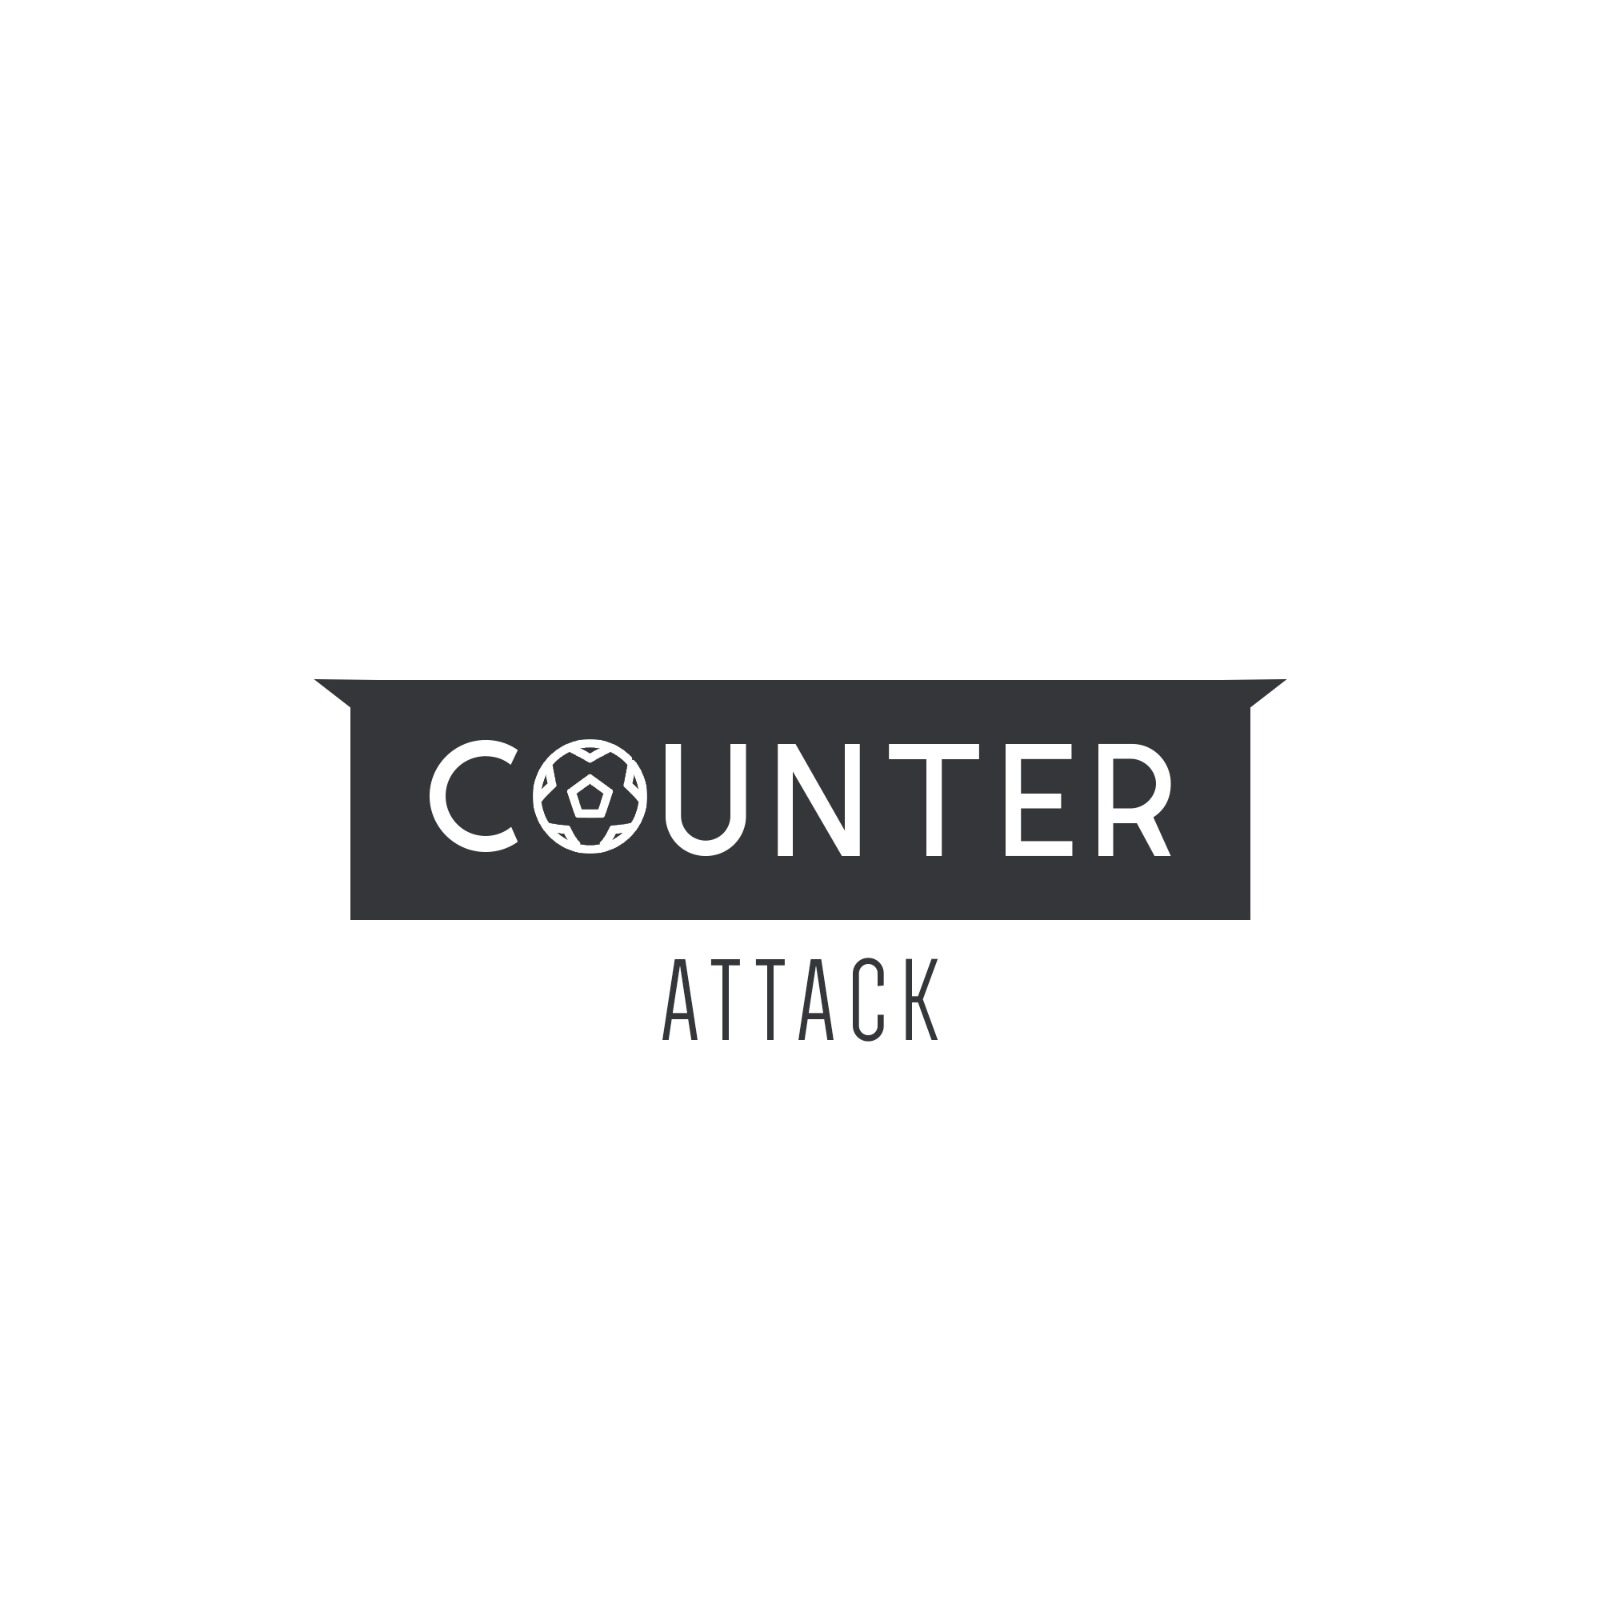 Counter Attack - Episode 88 - Maguire Doing Okay?